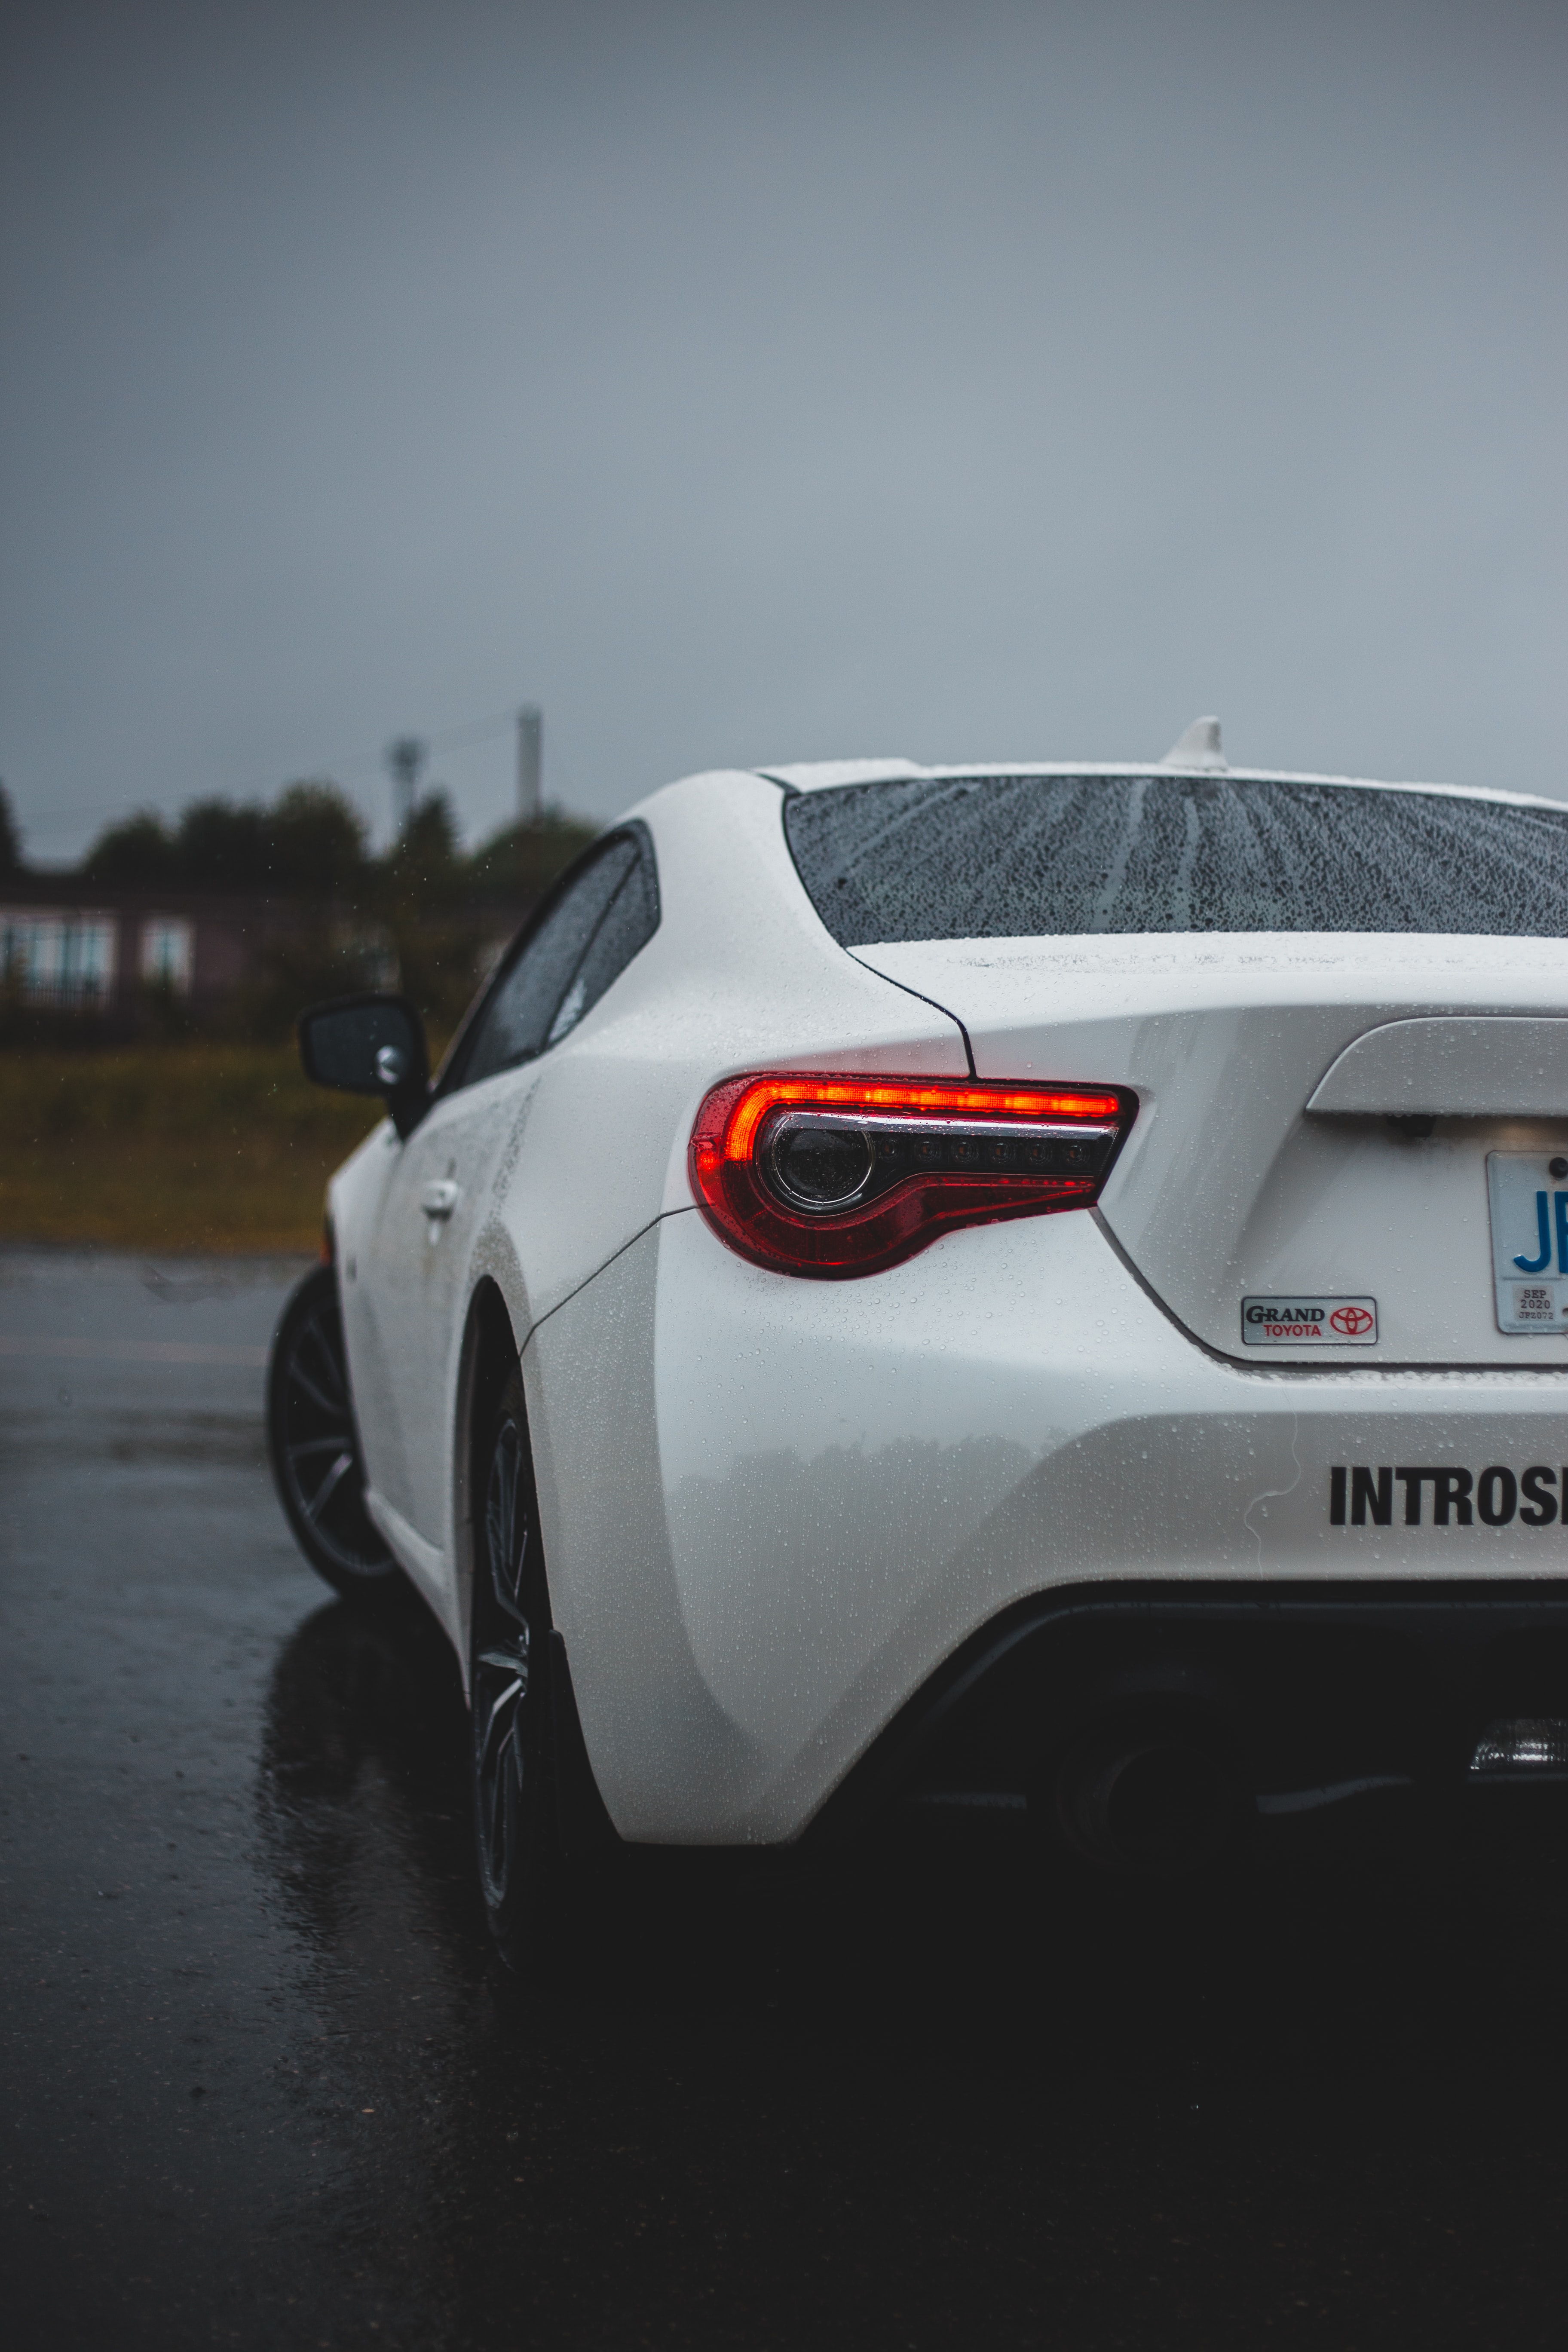 toyota, cars, white, wet, car, back view, rear view images